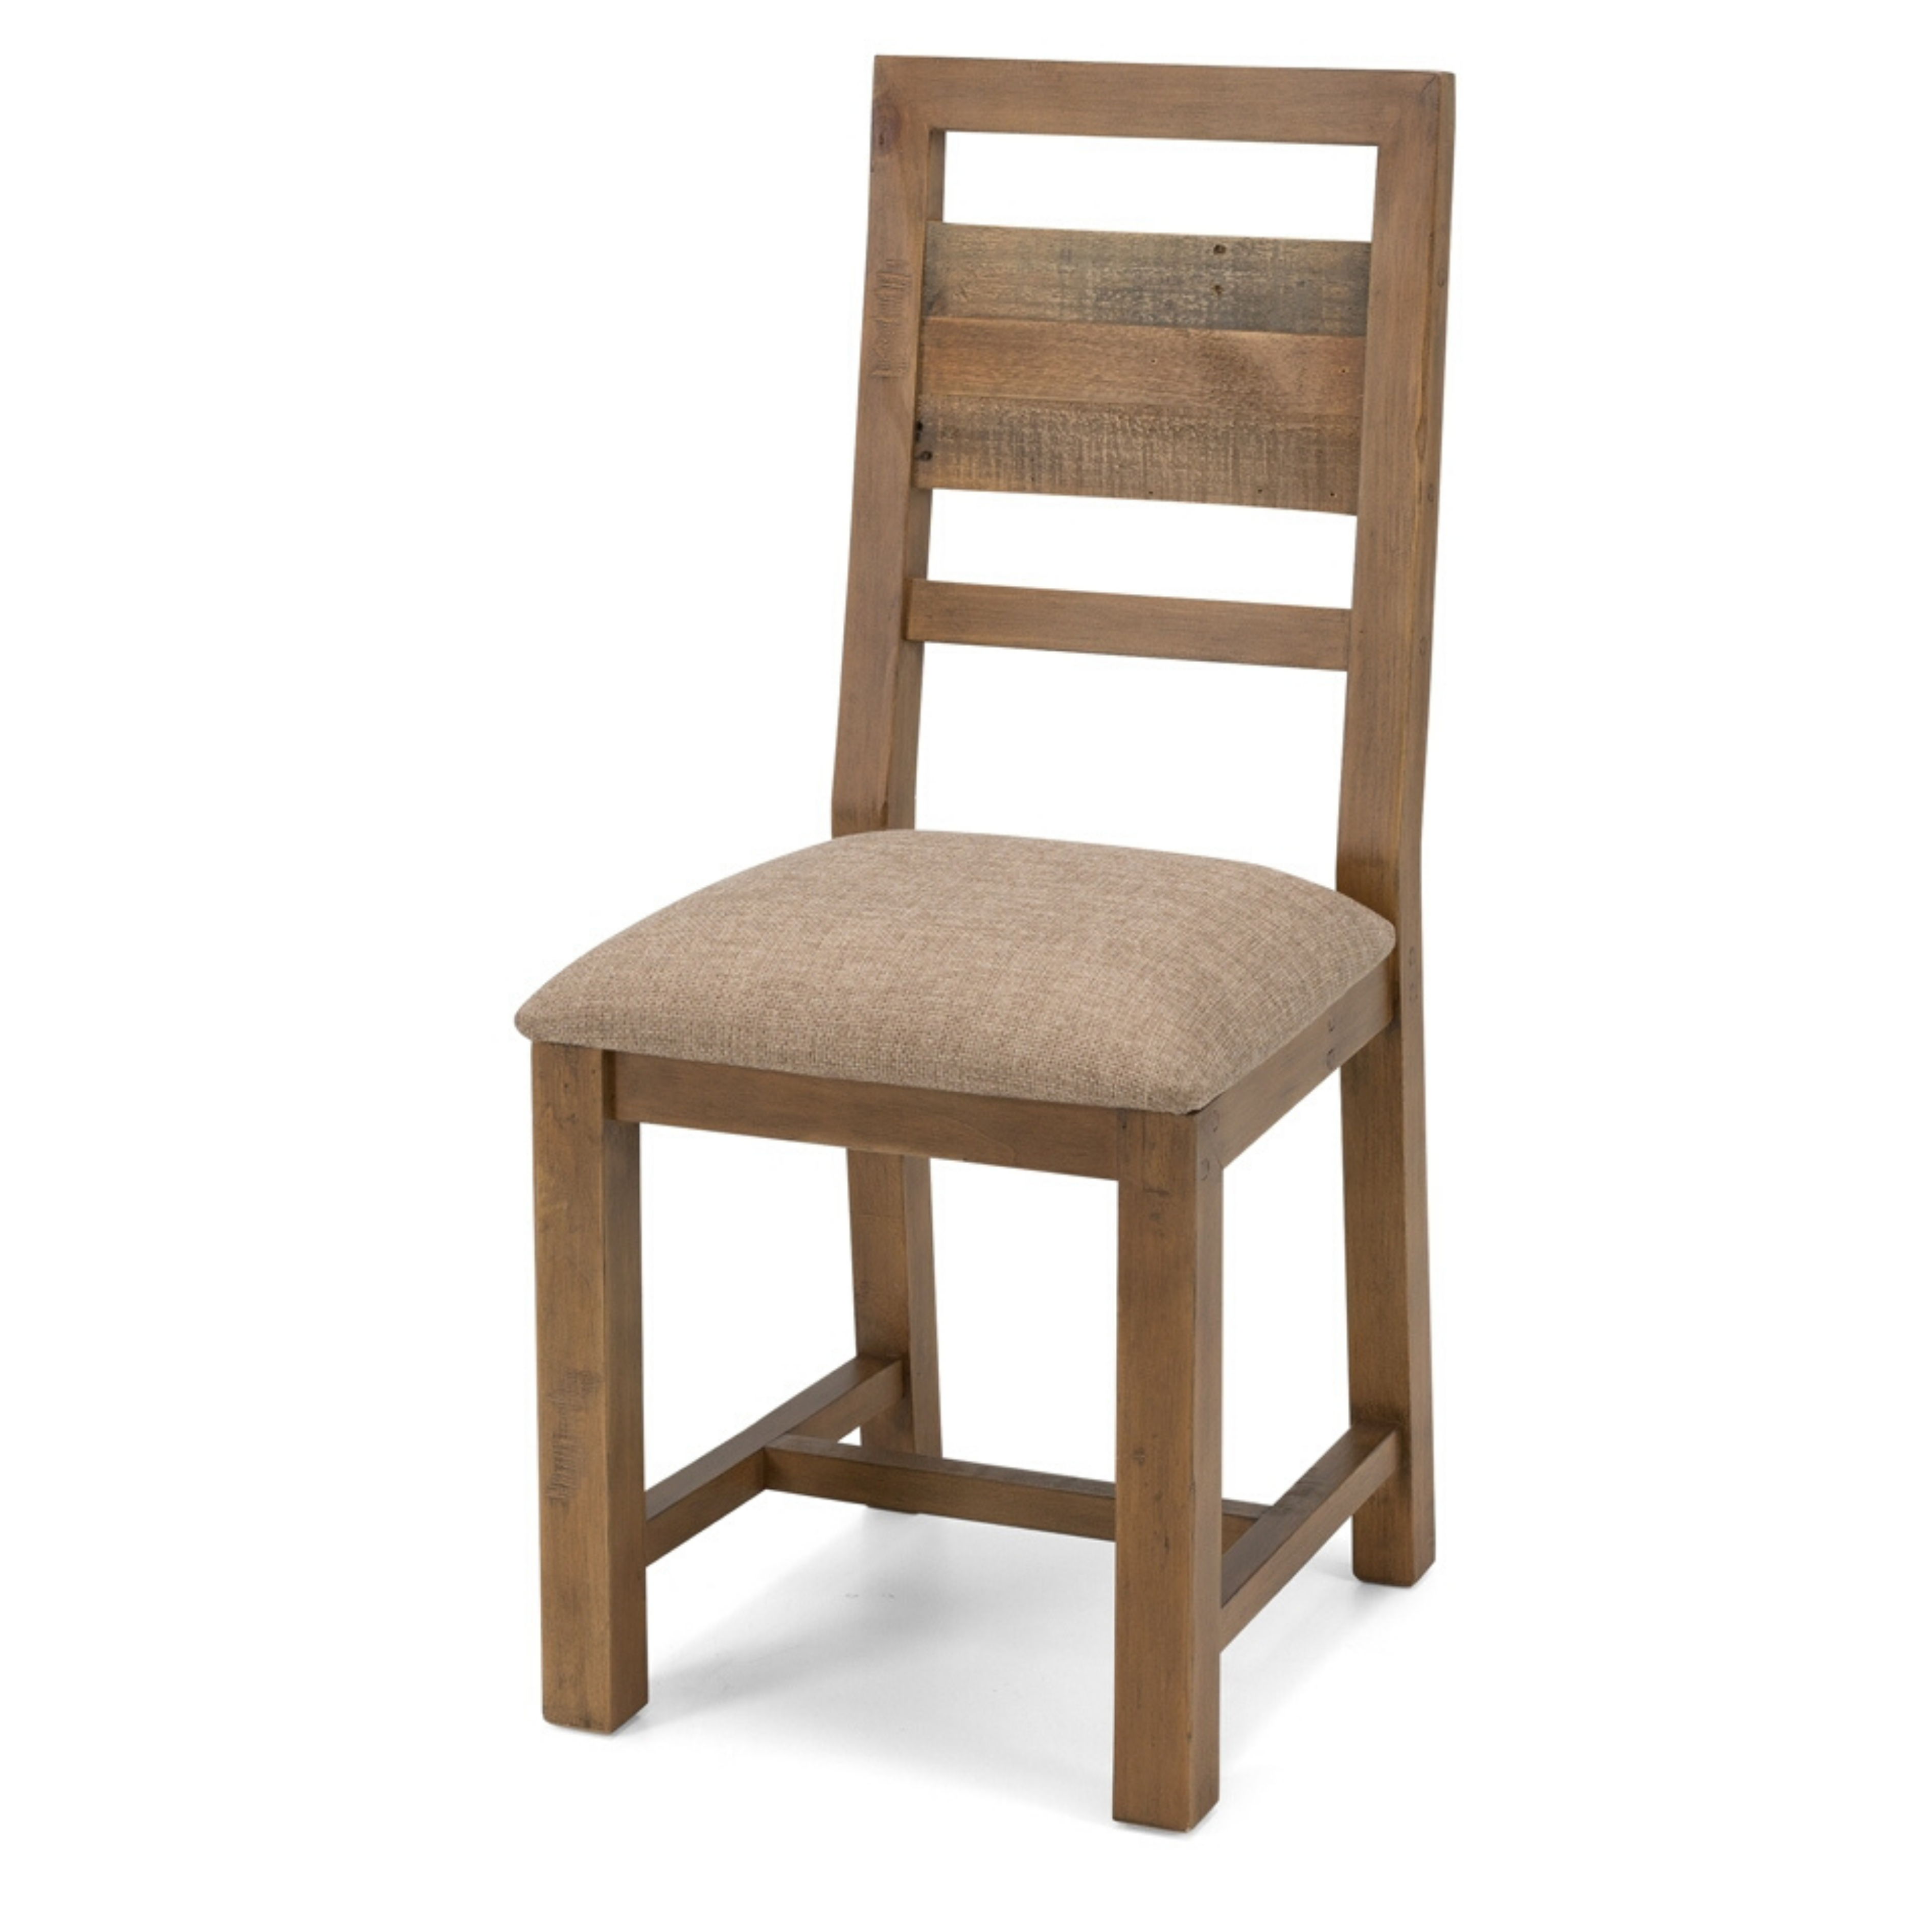 CRATE DINING CHAIR | CUSHION SEAT